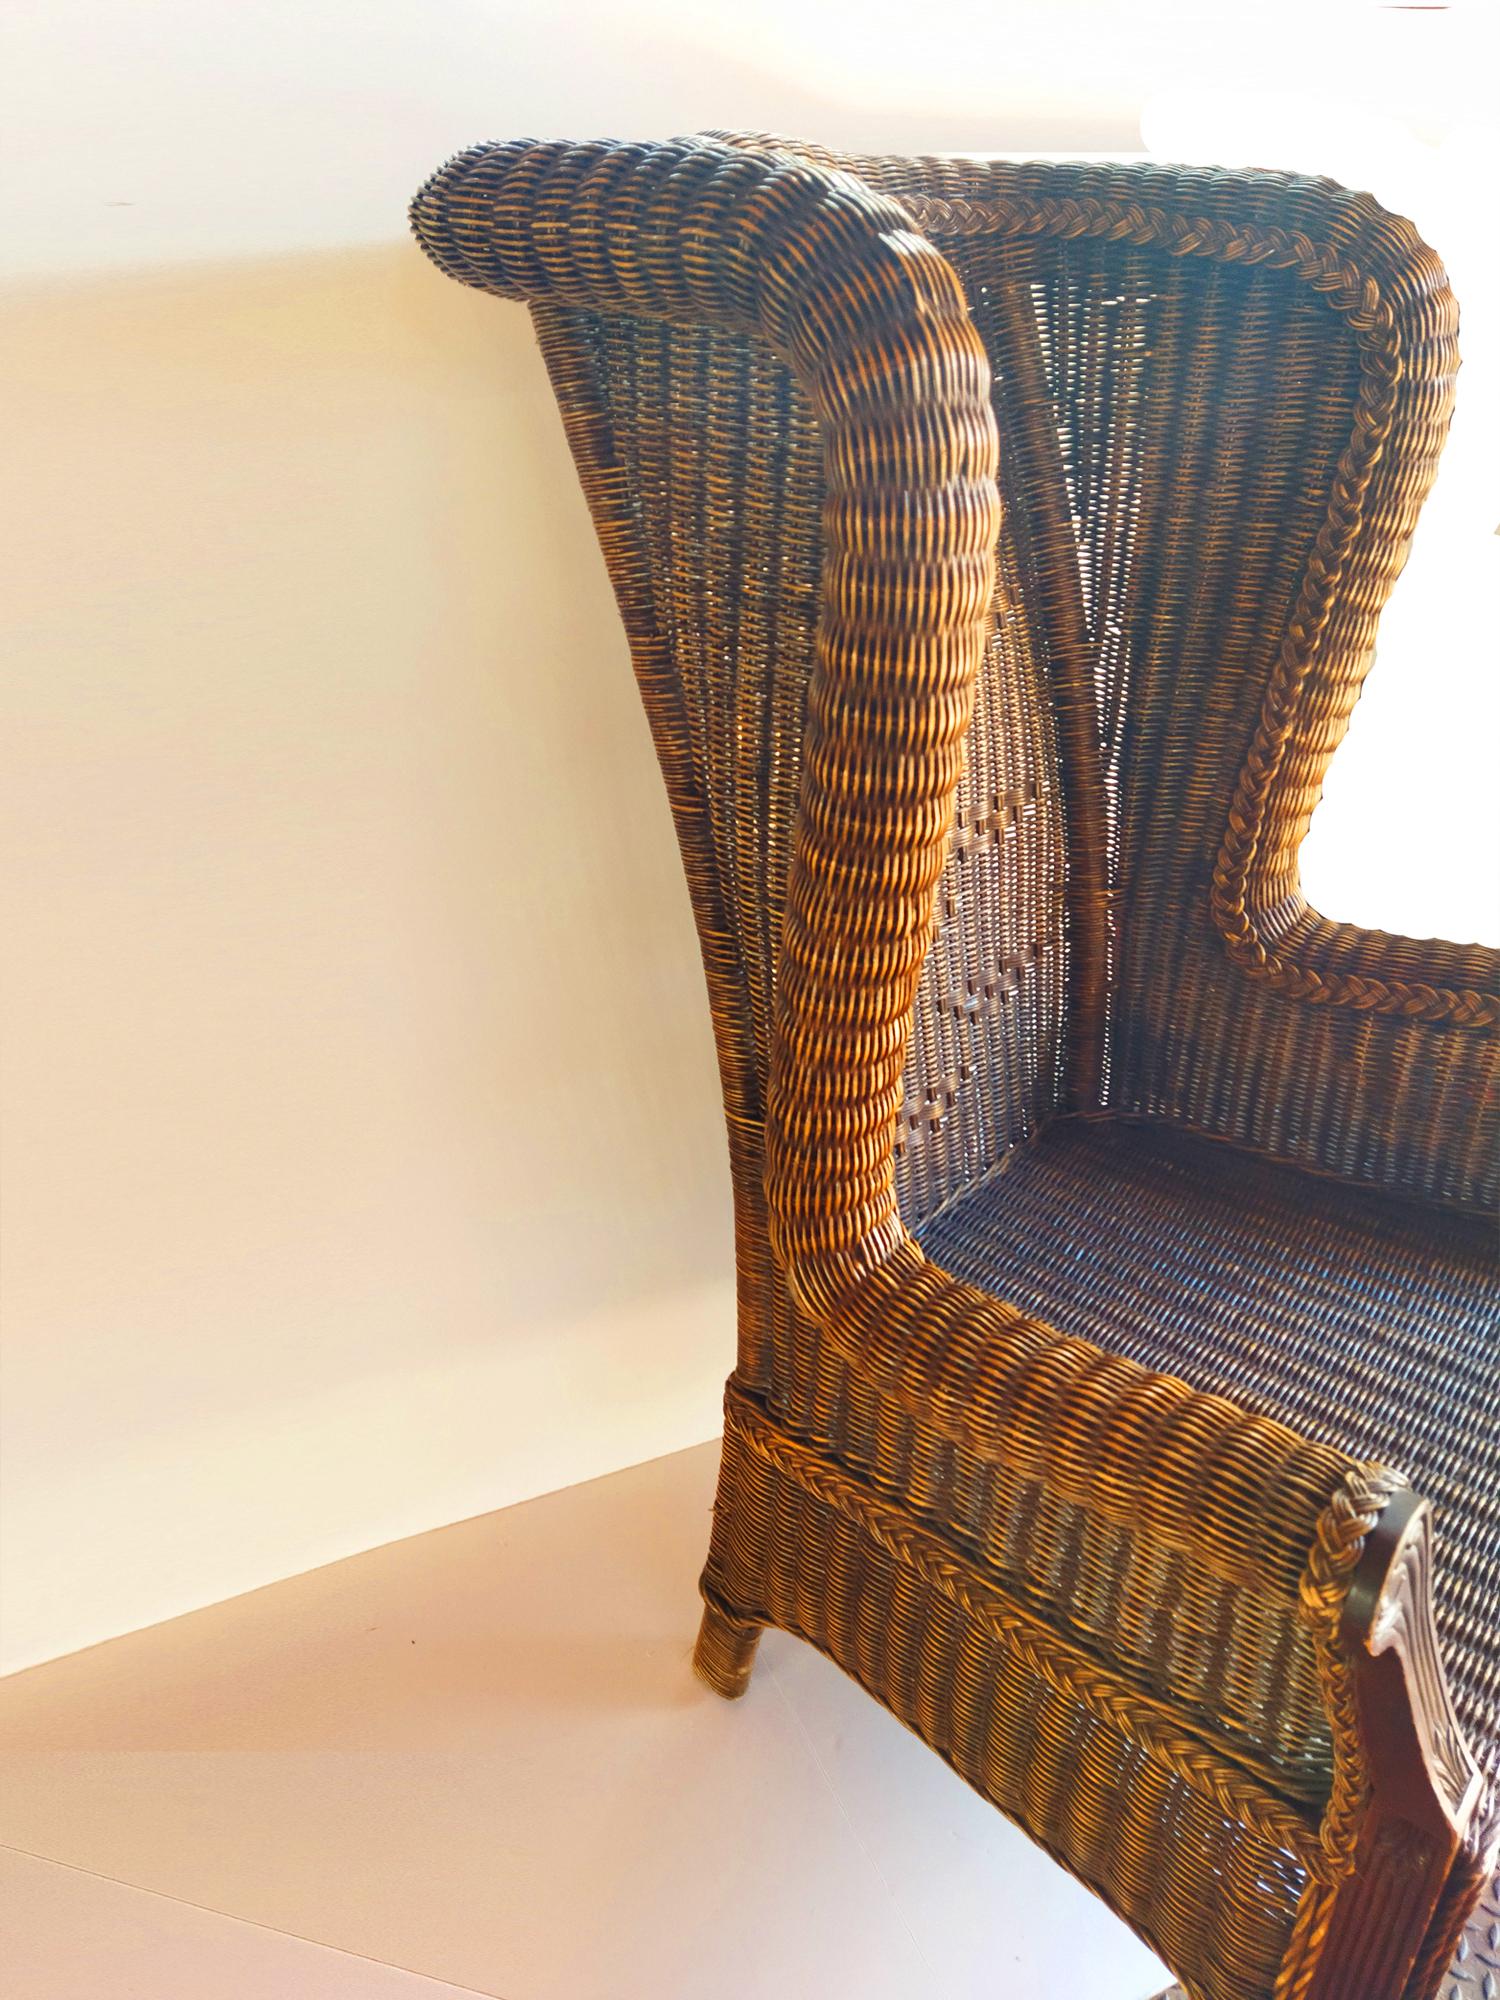  Spectacular VictorianStyle  Wicker Throne, Very Big  High Backrest  Wide Seat For Sale 2